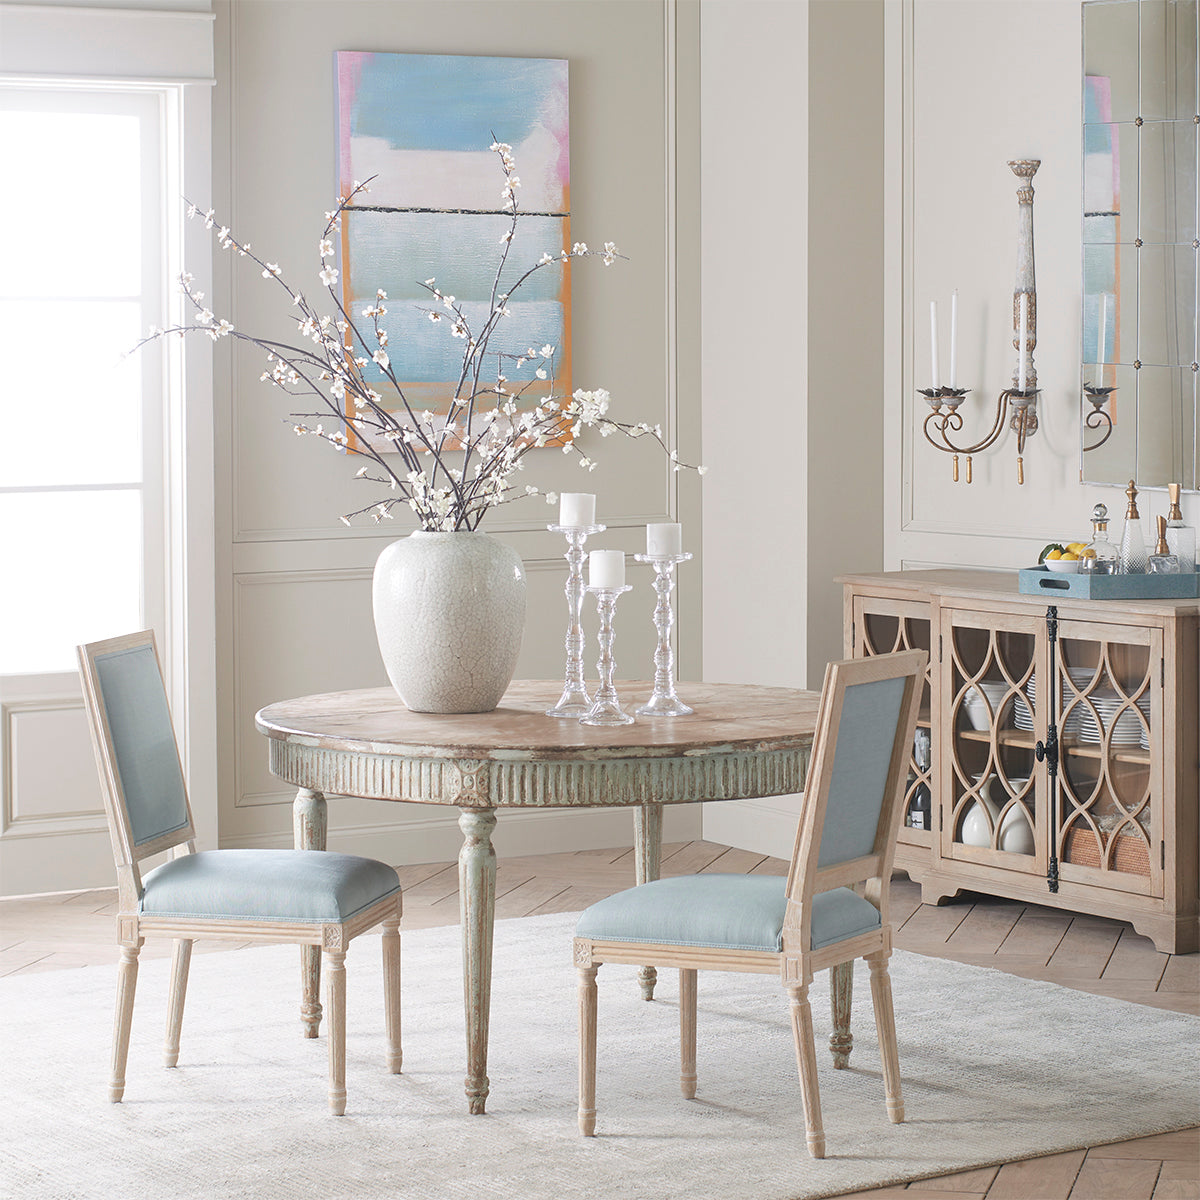 Chateau Chair Without Arm With French Blue Cloth Dining Room Scene